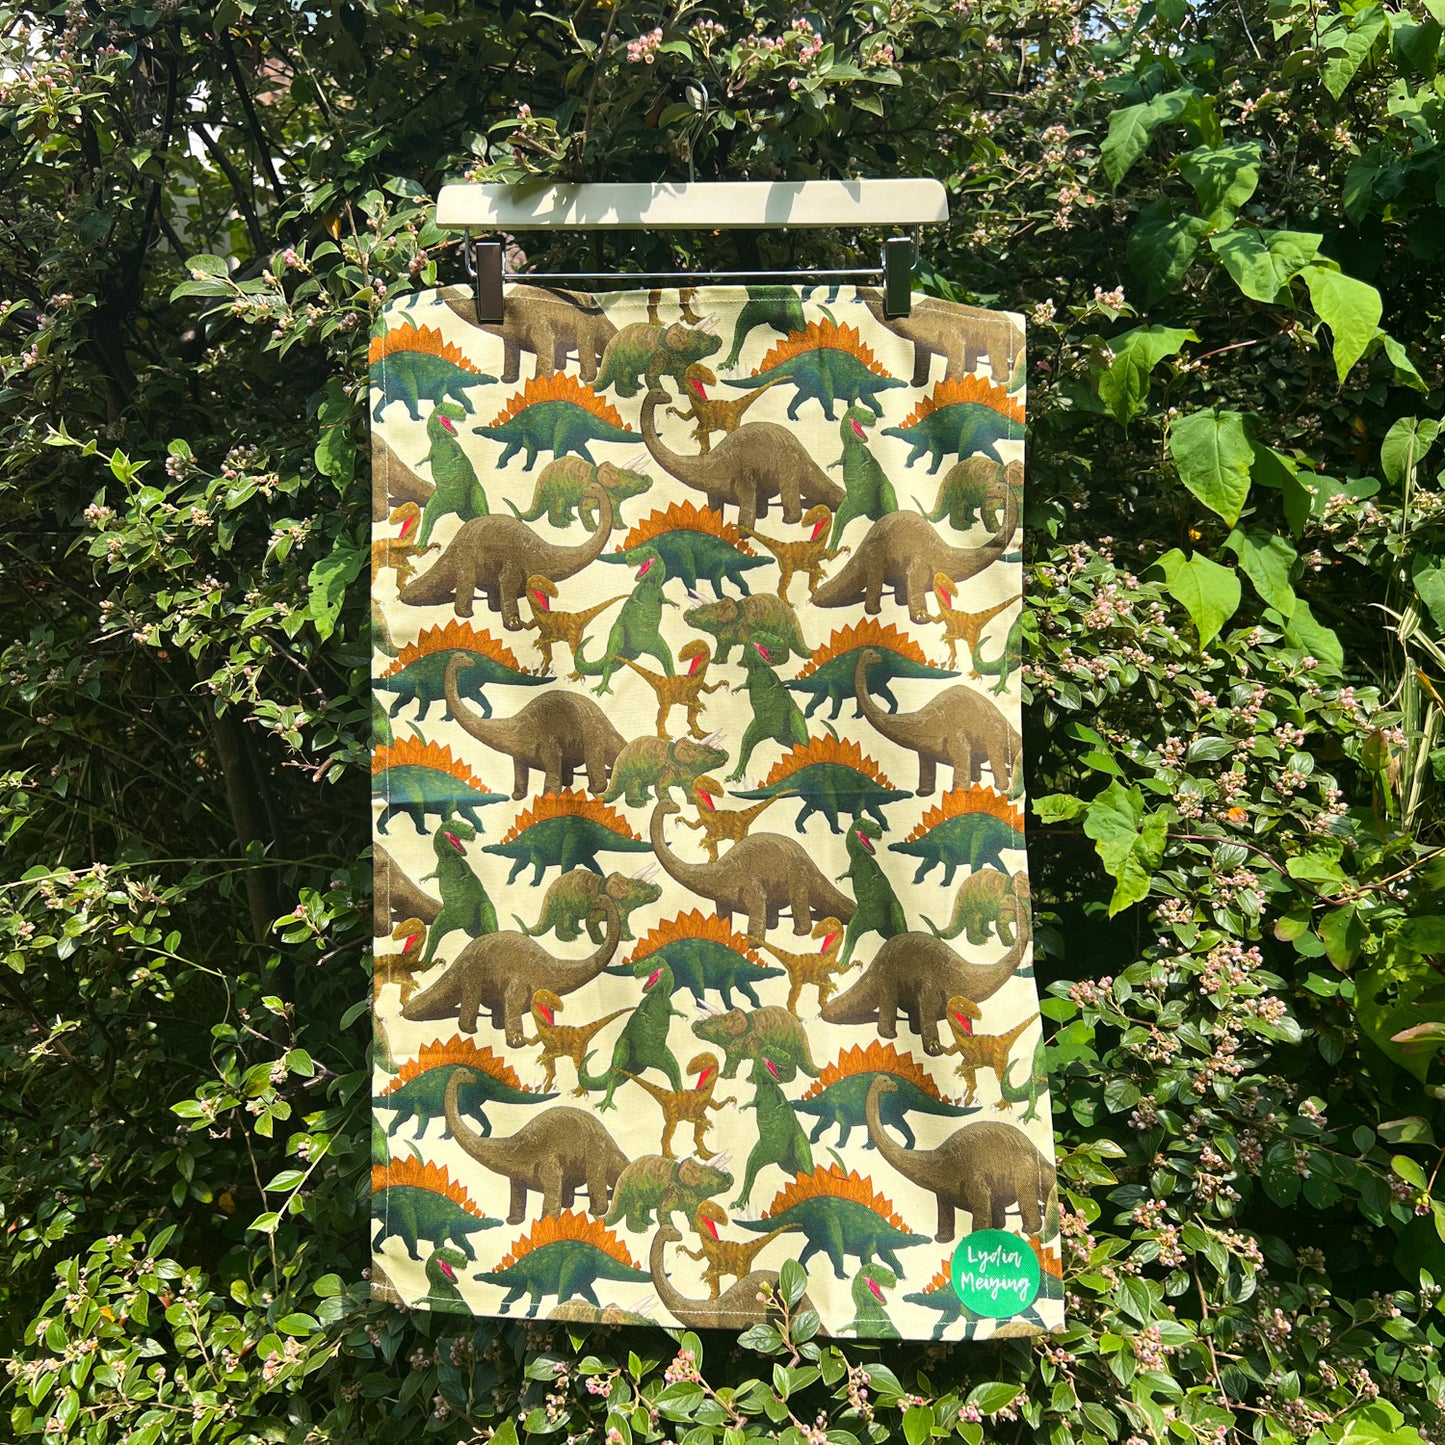 Tea towel with dinosaur repeat pattern hung up against a garden backdrop